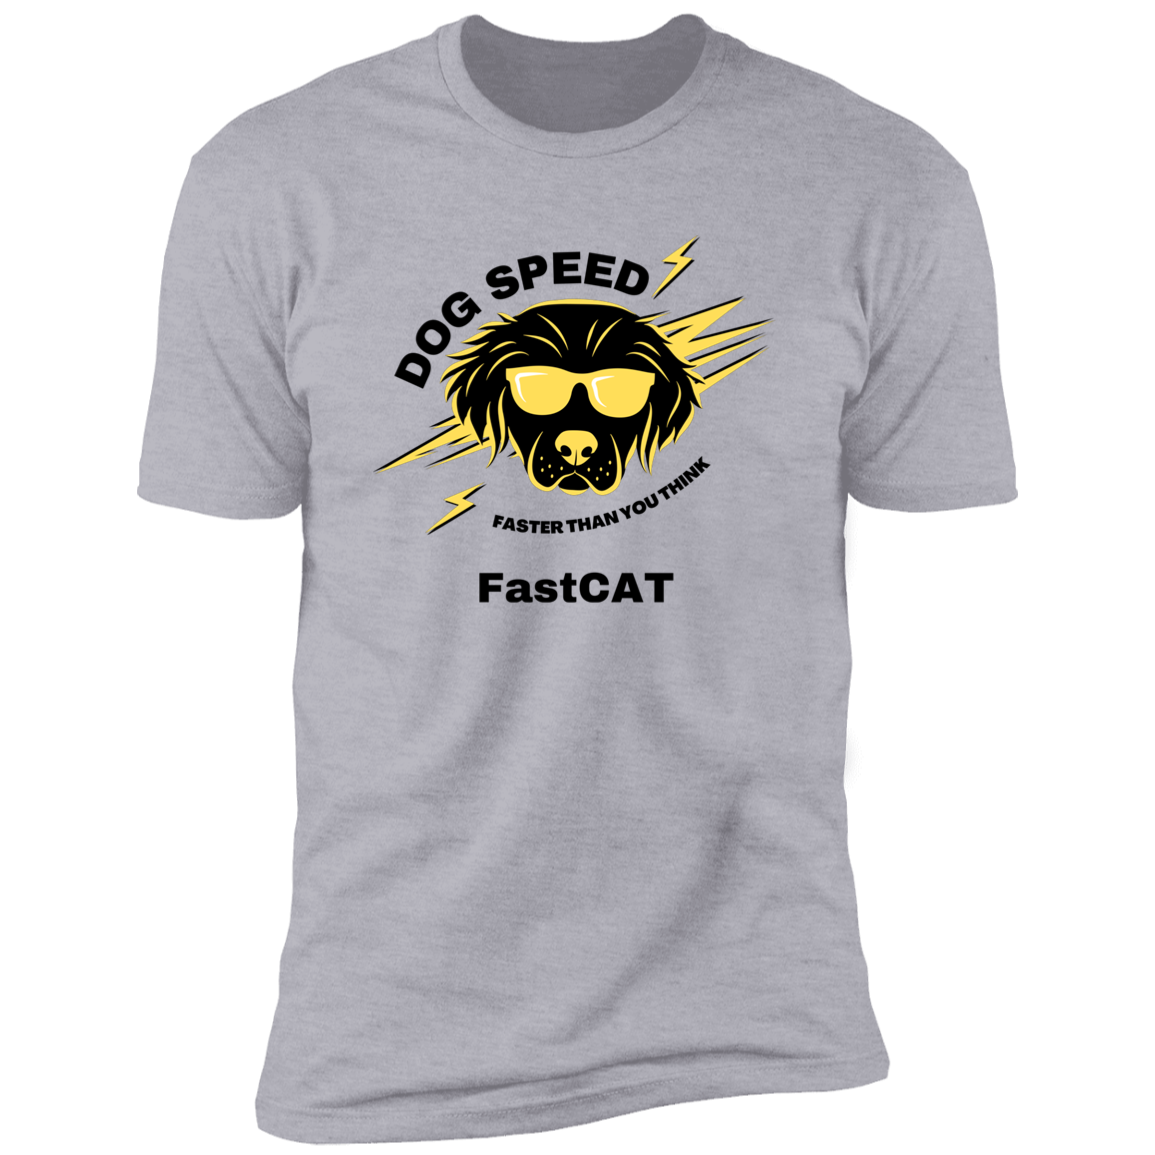 Dog Speed Faster Than You Think FastCAT T-shirt, FastCAT shirt dog shirt for humans, in light heather gray